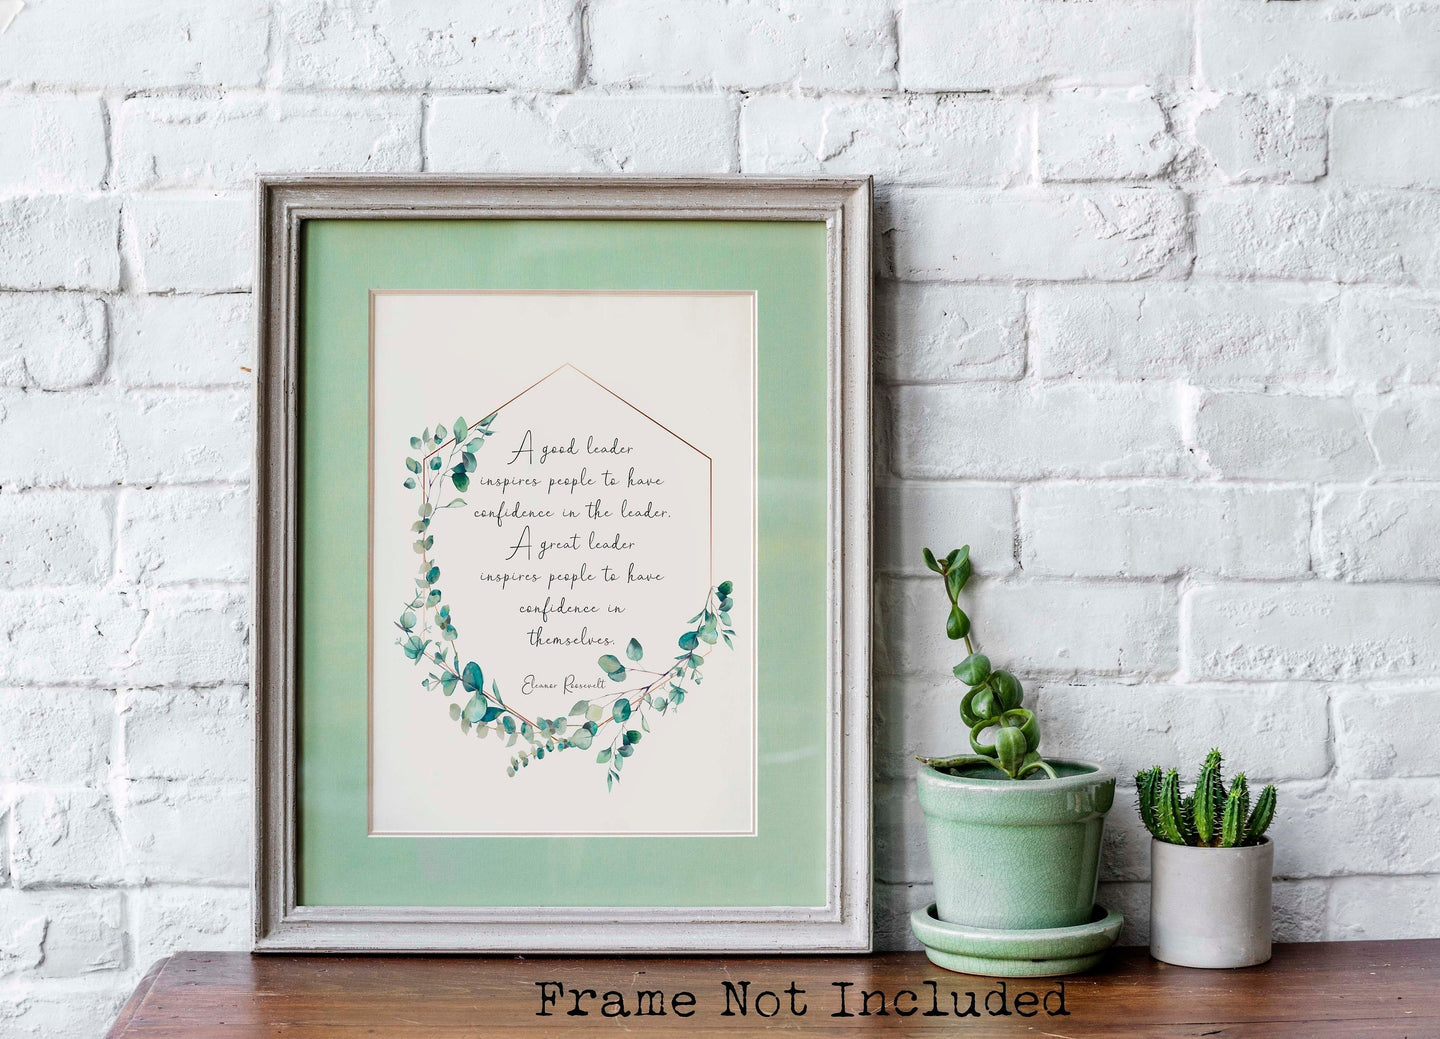 Eleanor Roosevelt Print - A Good Leader and A Great Leader